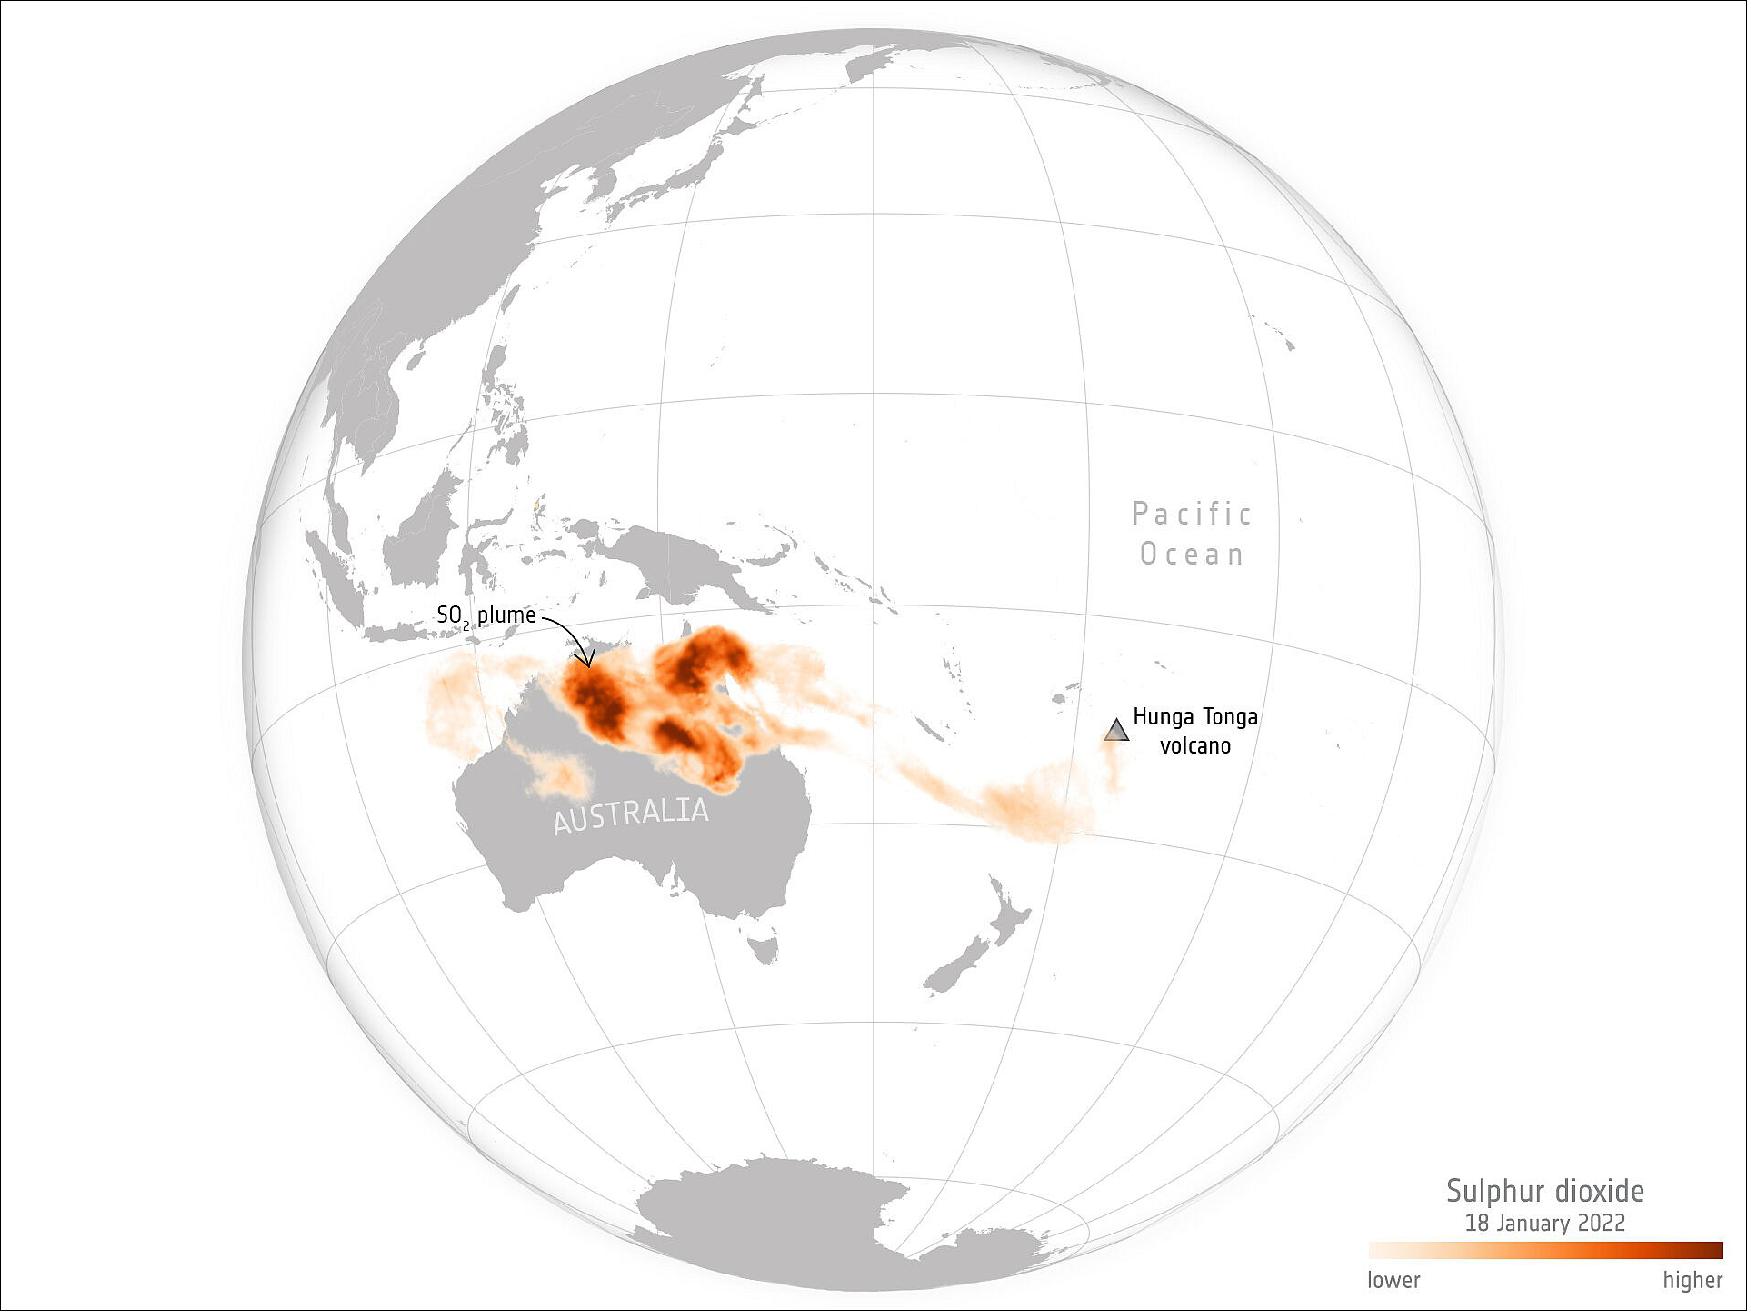 Figure 27: Sulphur dioxide from Tonga eruption spreads over Australia on 18 January 2022, more than 7000 km west of the eruption (image credit: ESA, the image contains modified Copernicus Sentinel data (2022), processed by ESA, CC BY-SA 3.0 IGO)